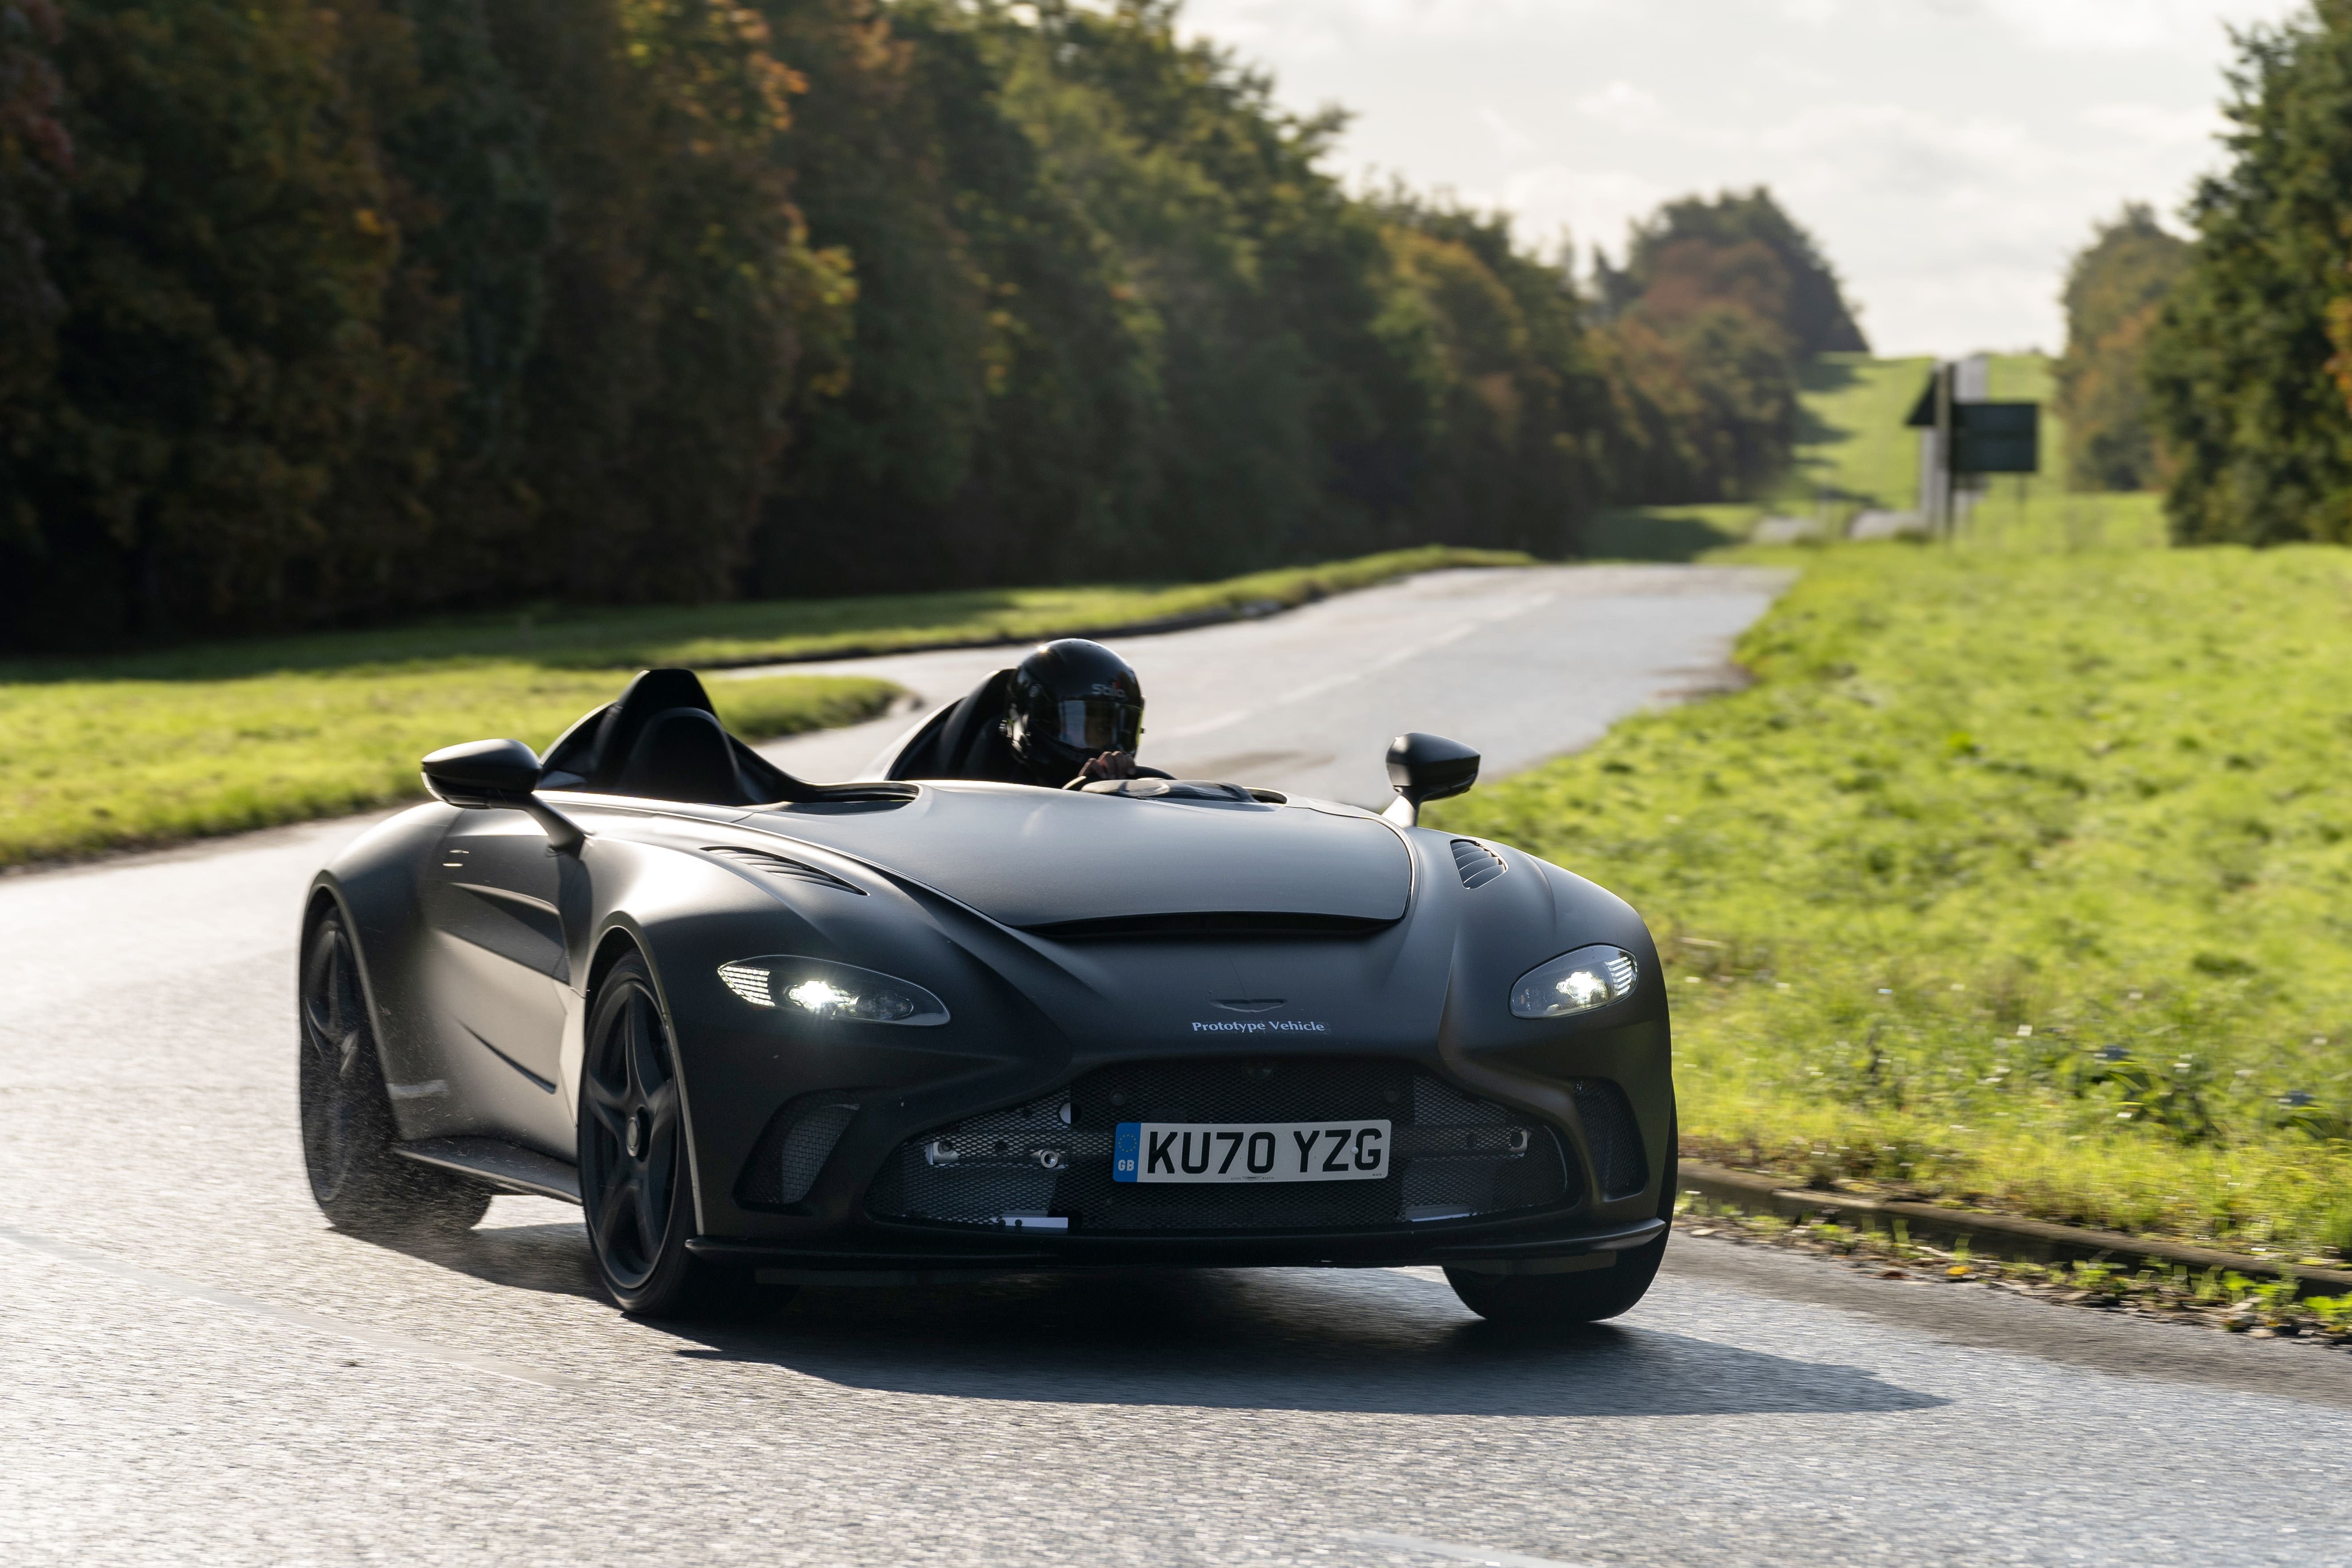 Check Out the Aston Martin V12 Speedster on the Road!